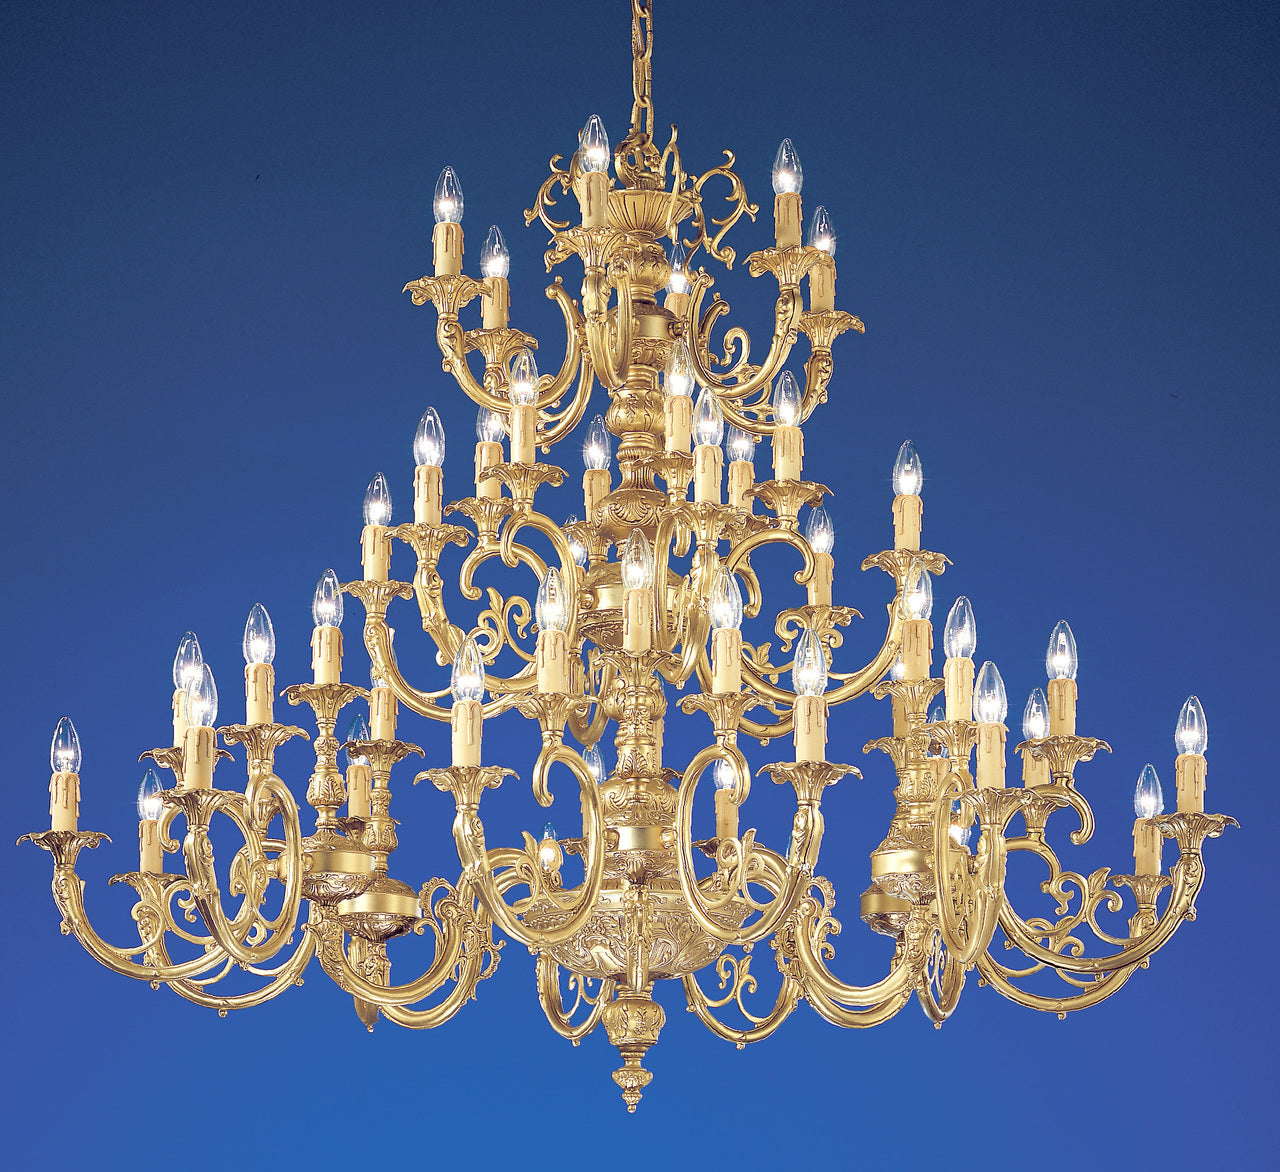 Classic Lighting 5748 SBB SC Princeton Crystal/Cast Brass Chandelier in Satin Bronze/Brown Patina (Imported from Spain)